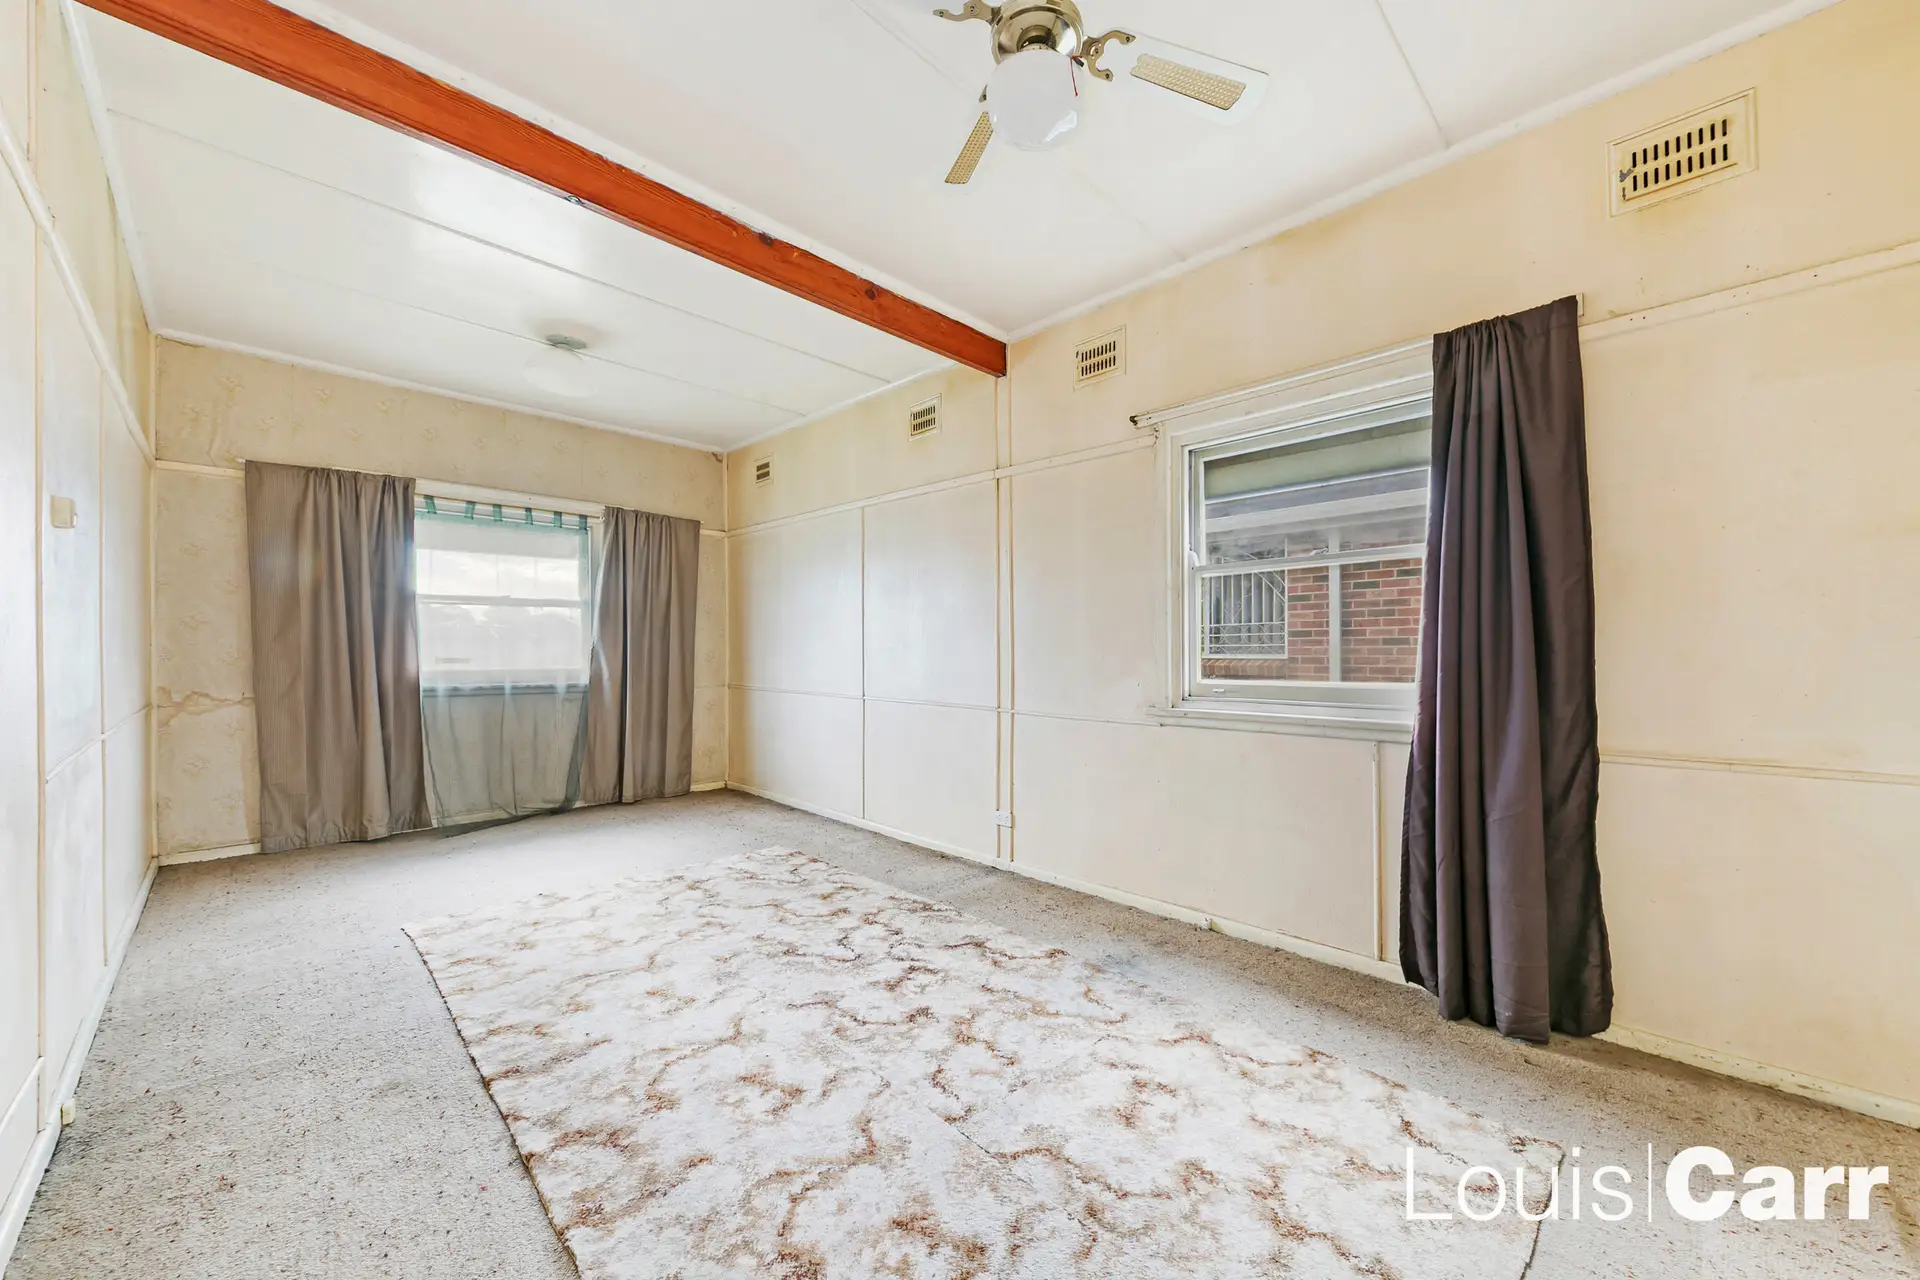 Photo #6: 44 McArthur Street, Guildford - Sold by Louis Carr Real Estate